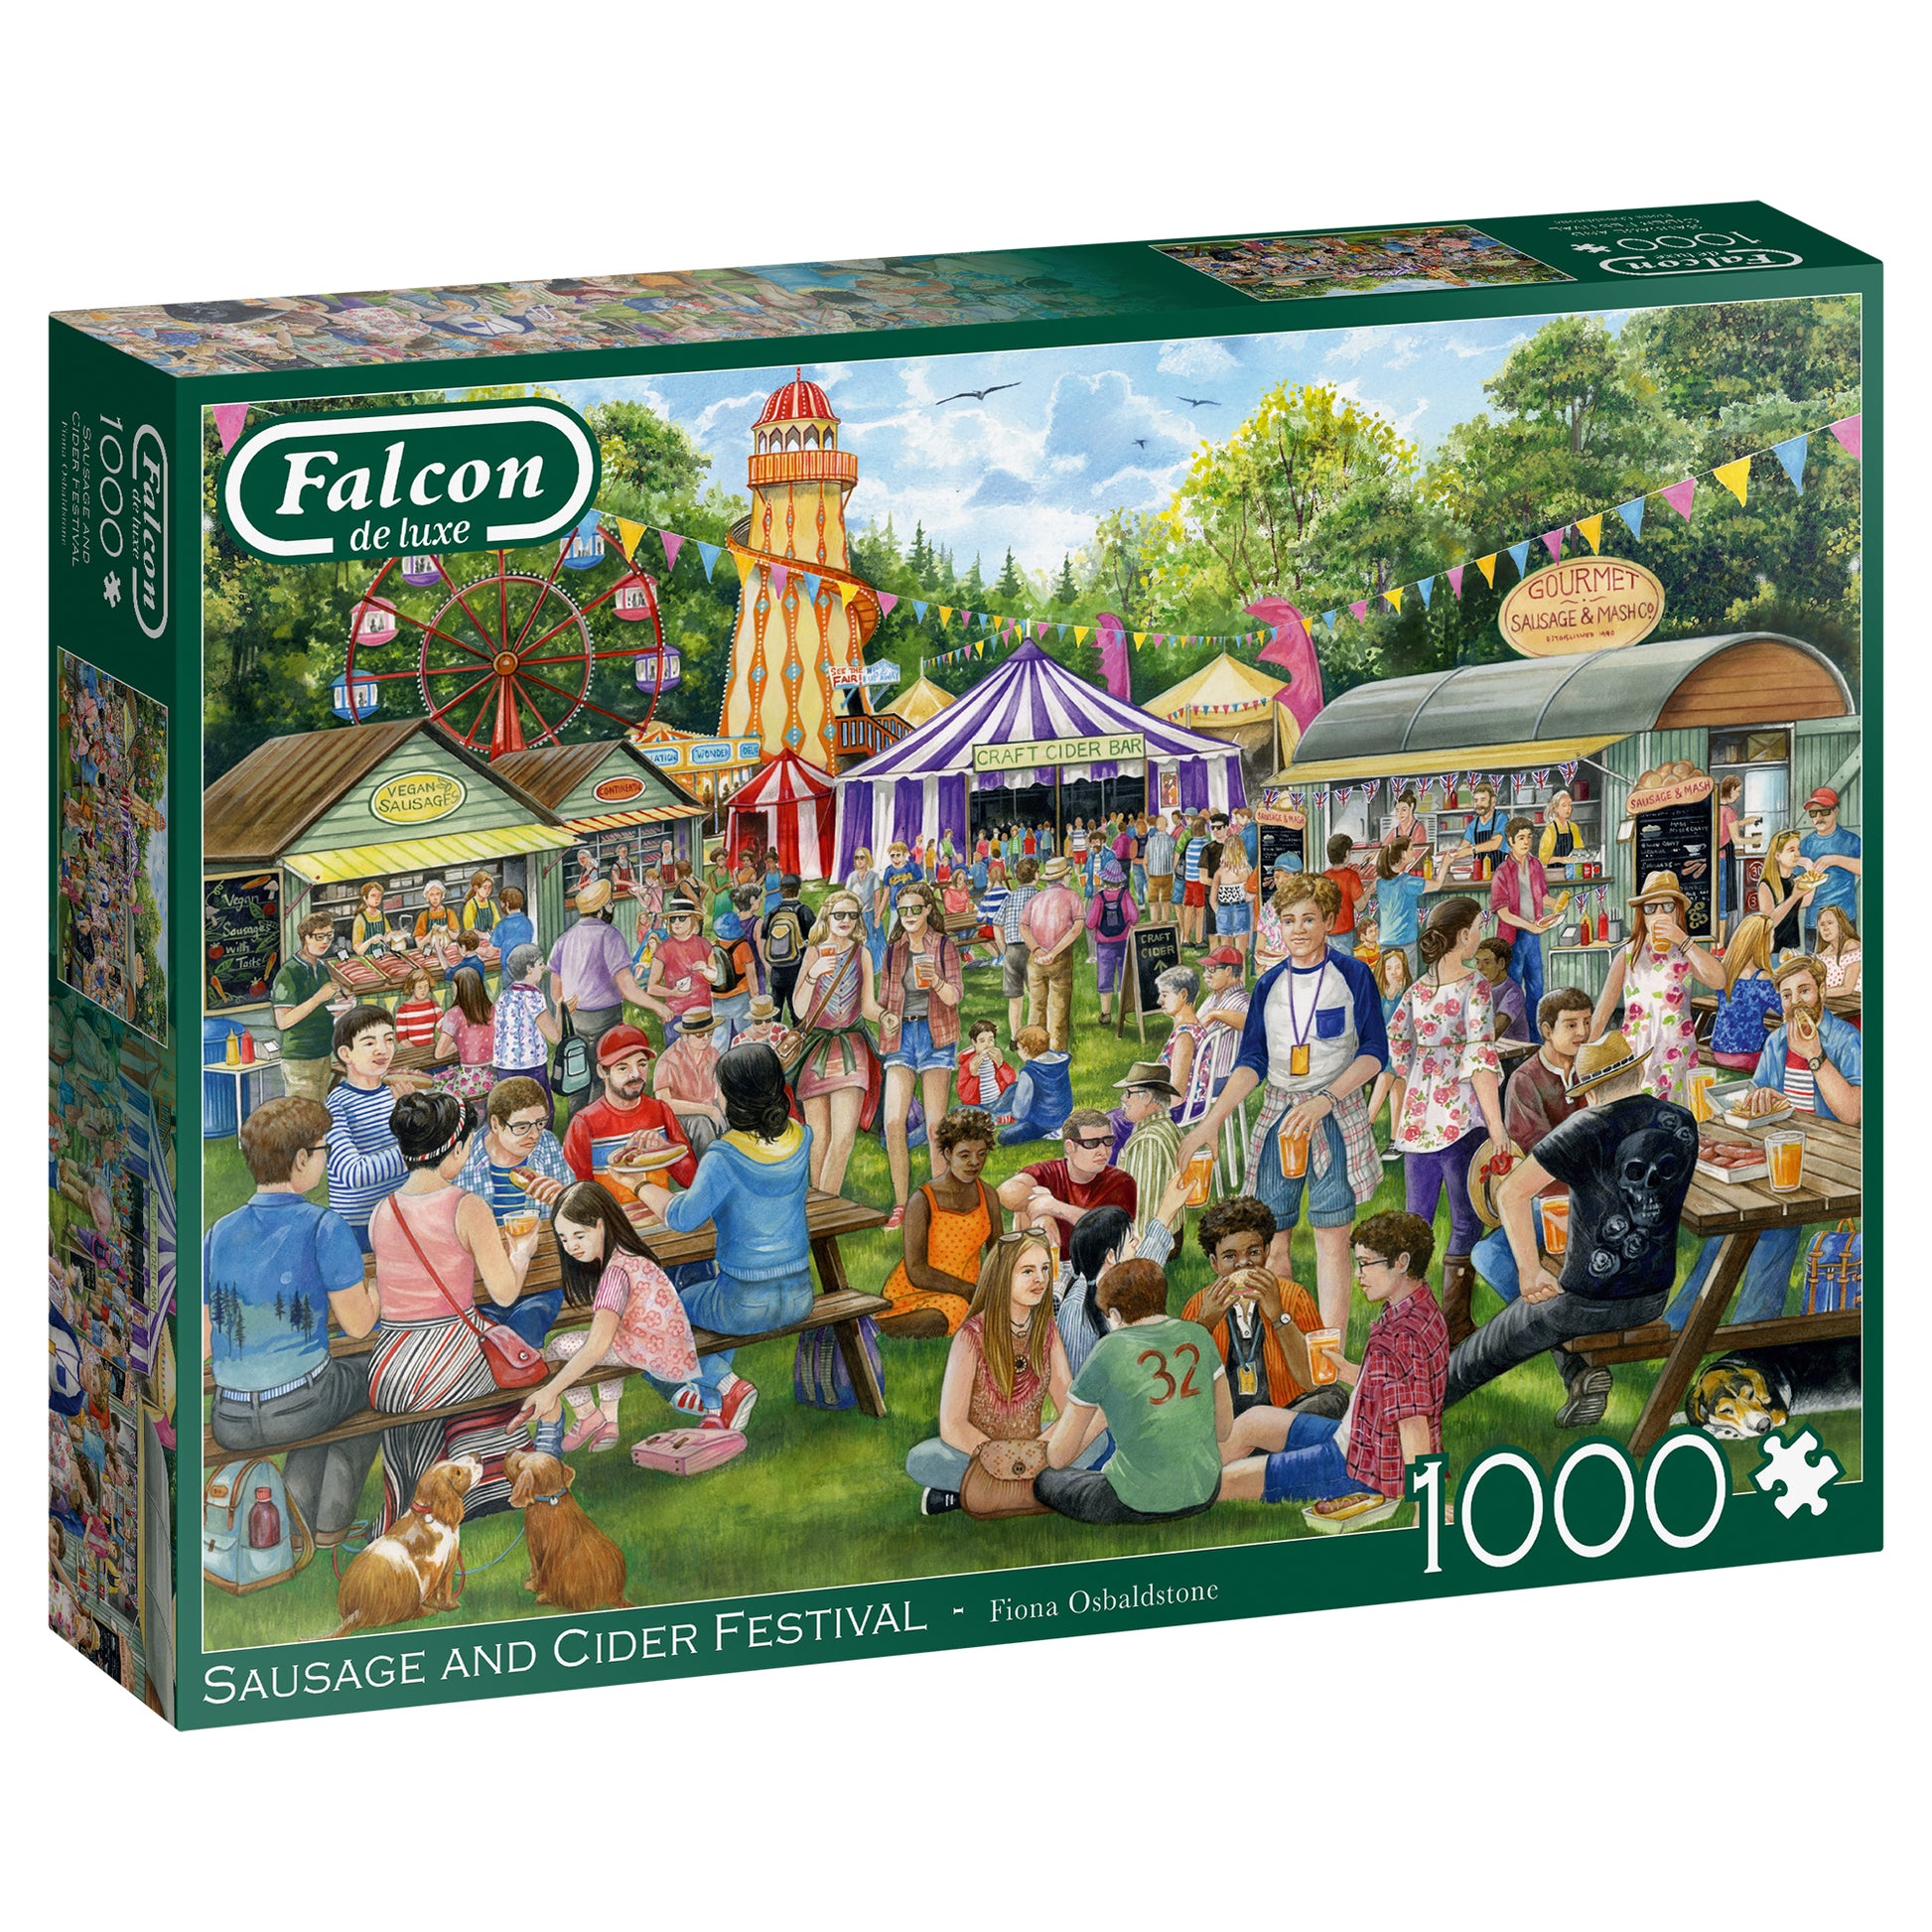 Falcon - Sausage and Cider Festival (1000 pieces) - product image - Jumboplay.com